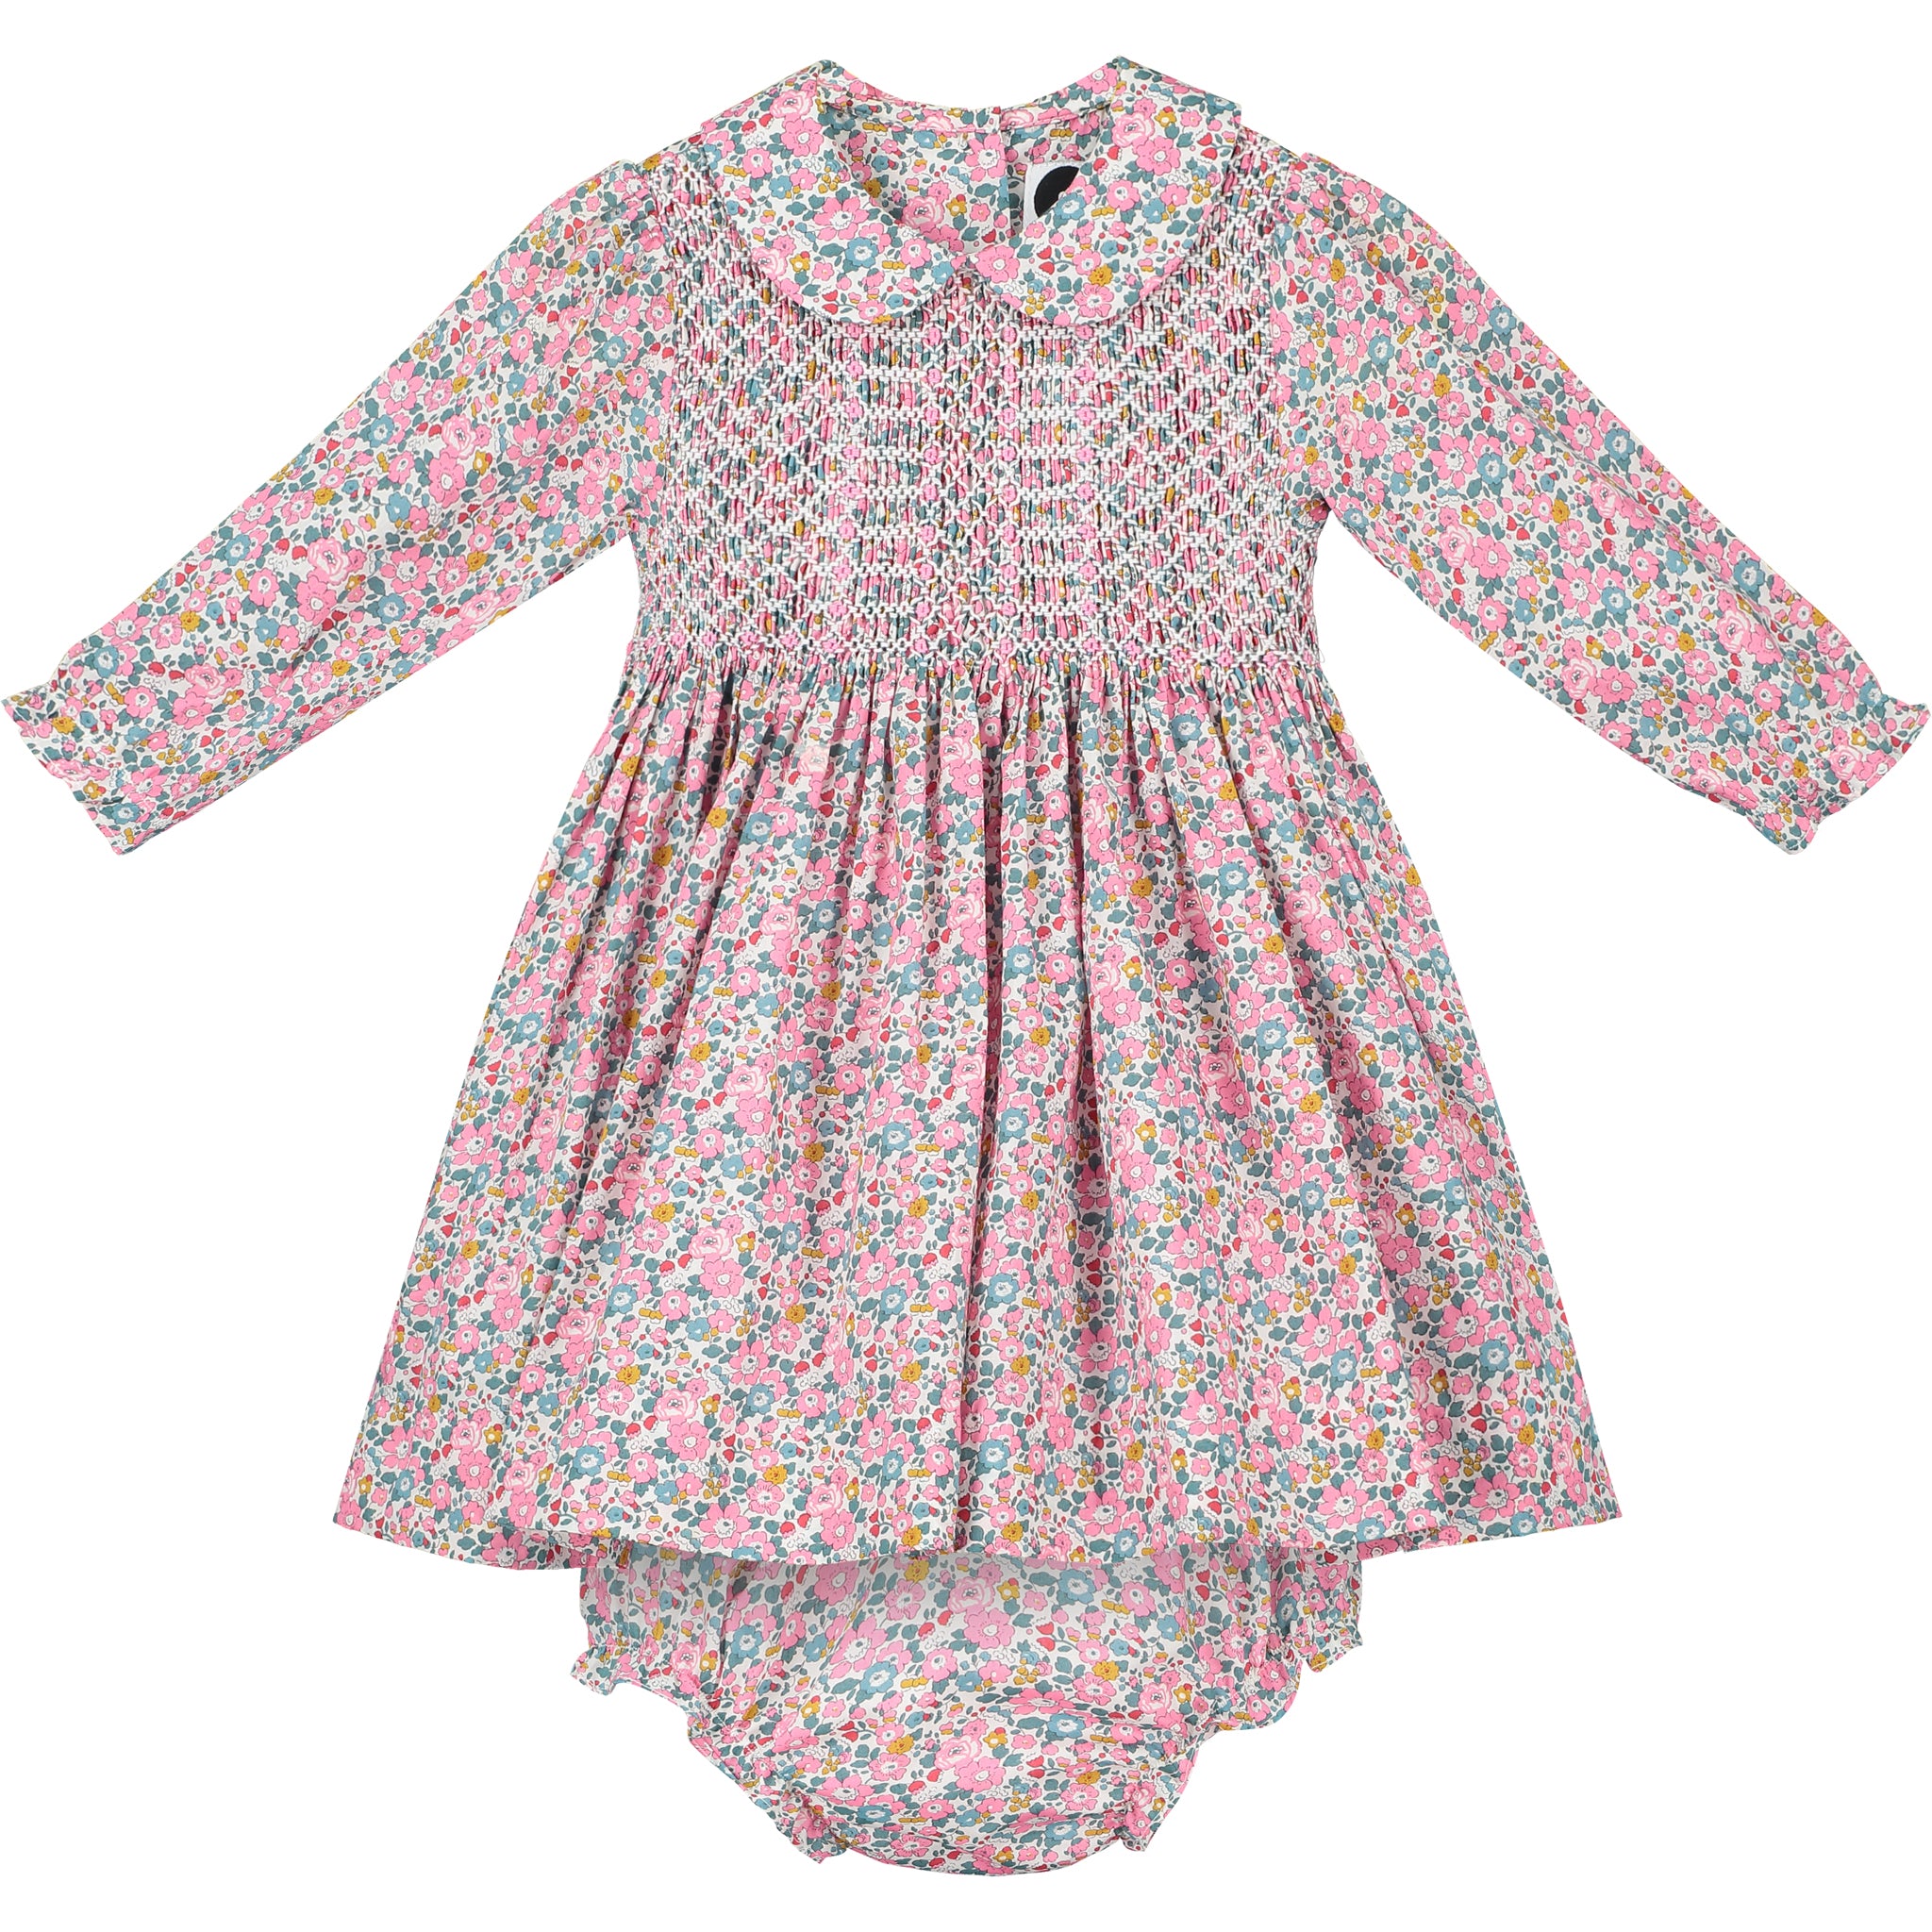 long-sleeved Liberty print baby dress, front